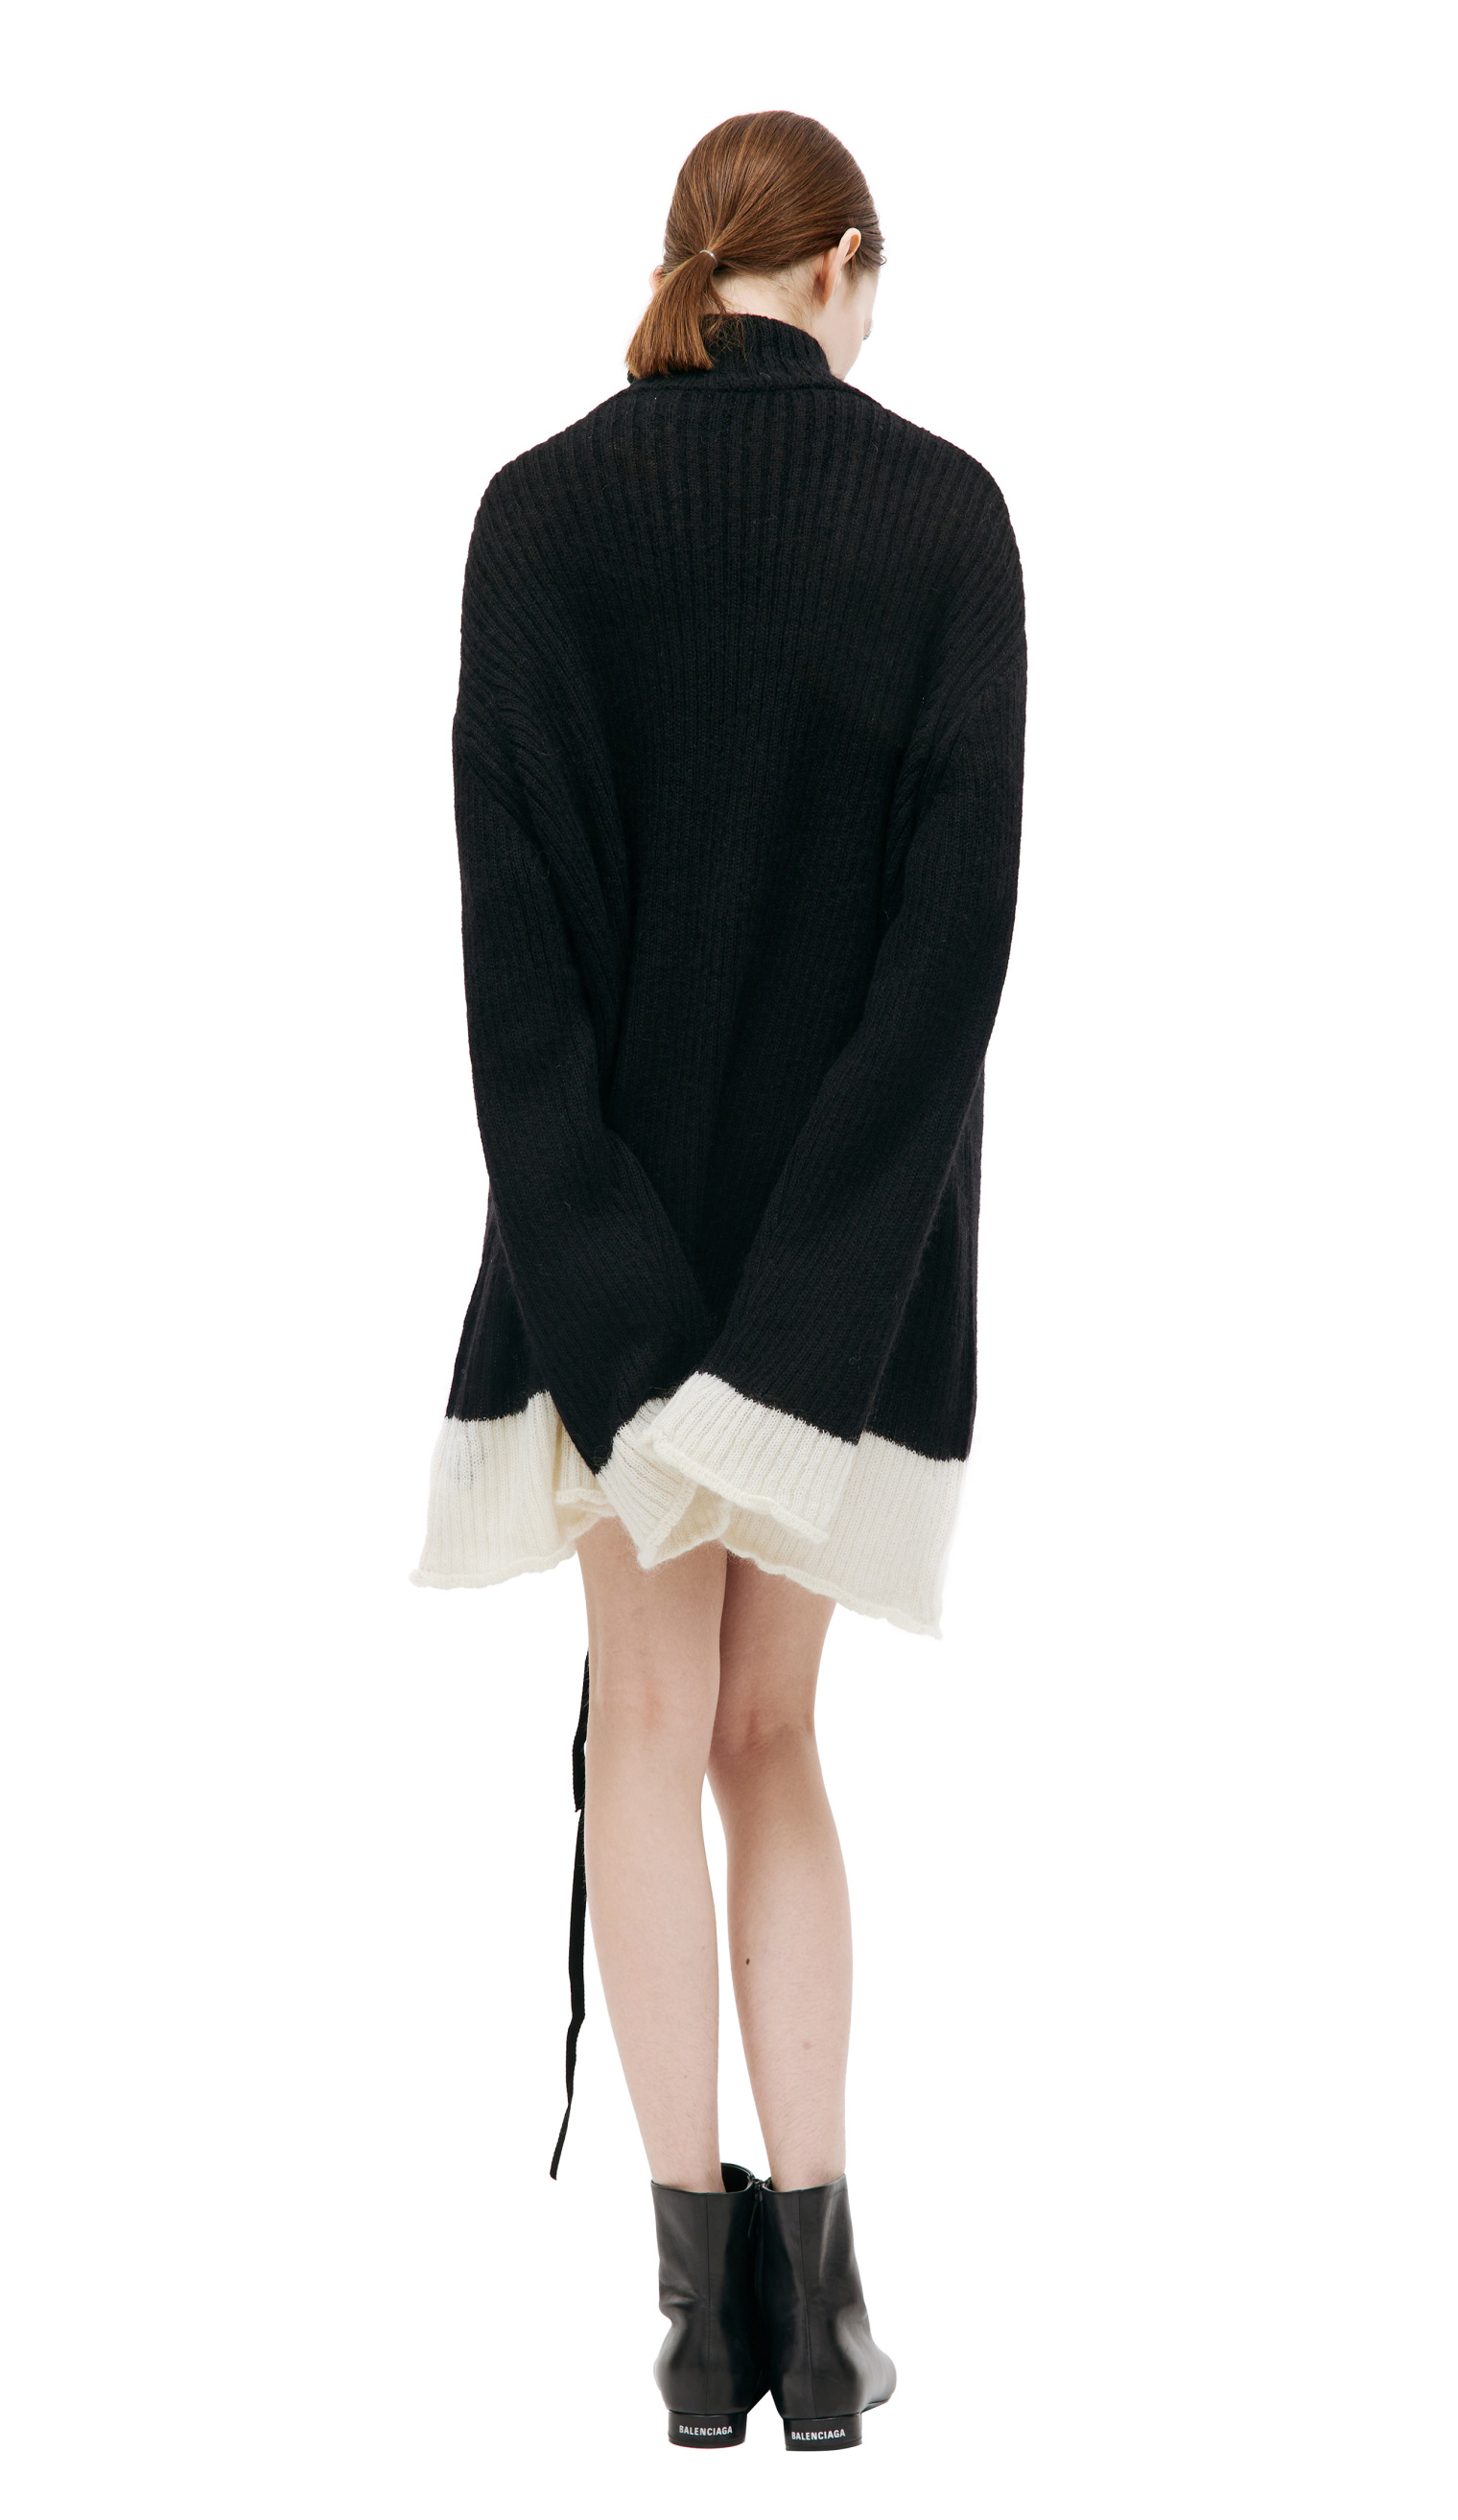 Undercover Black rolled edge sweater